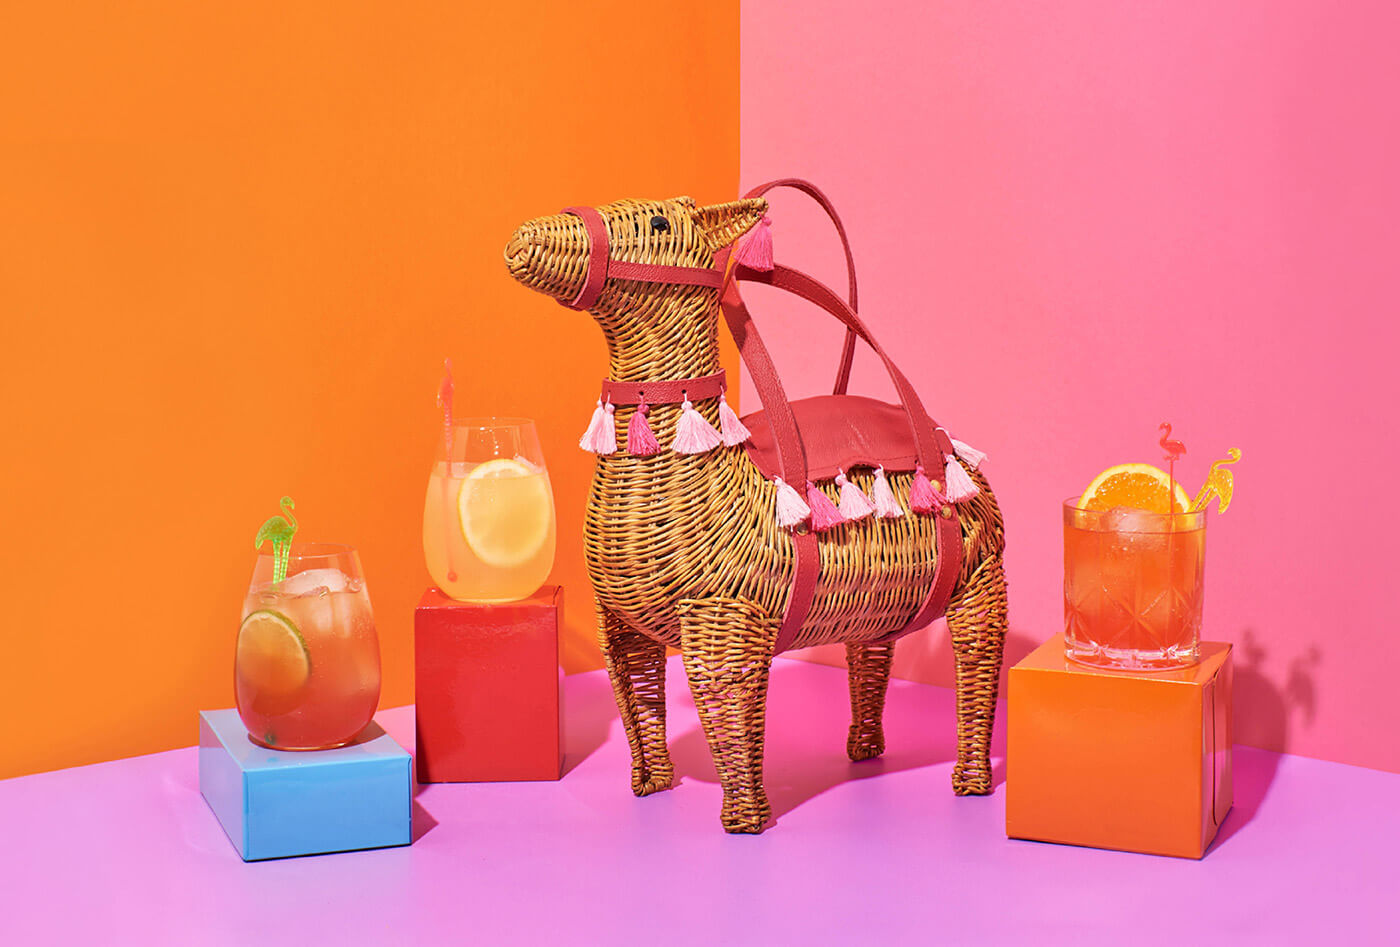 Bright orange and pink scene with llama shaped wicker handbag surrounded by cocktails